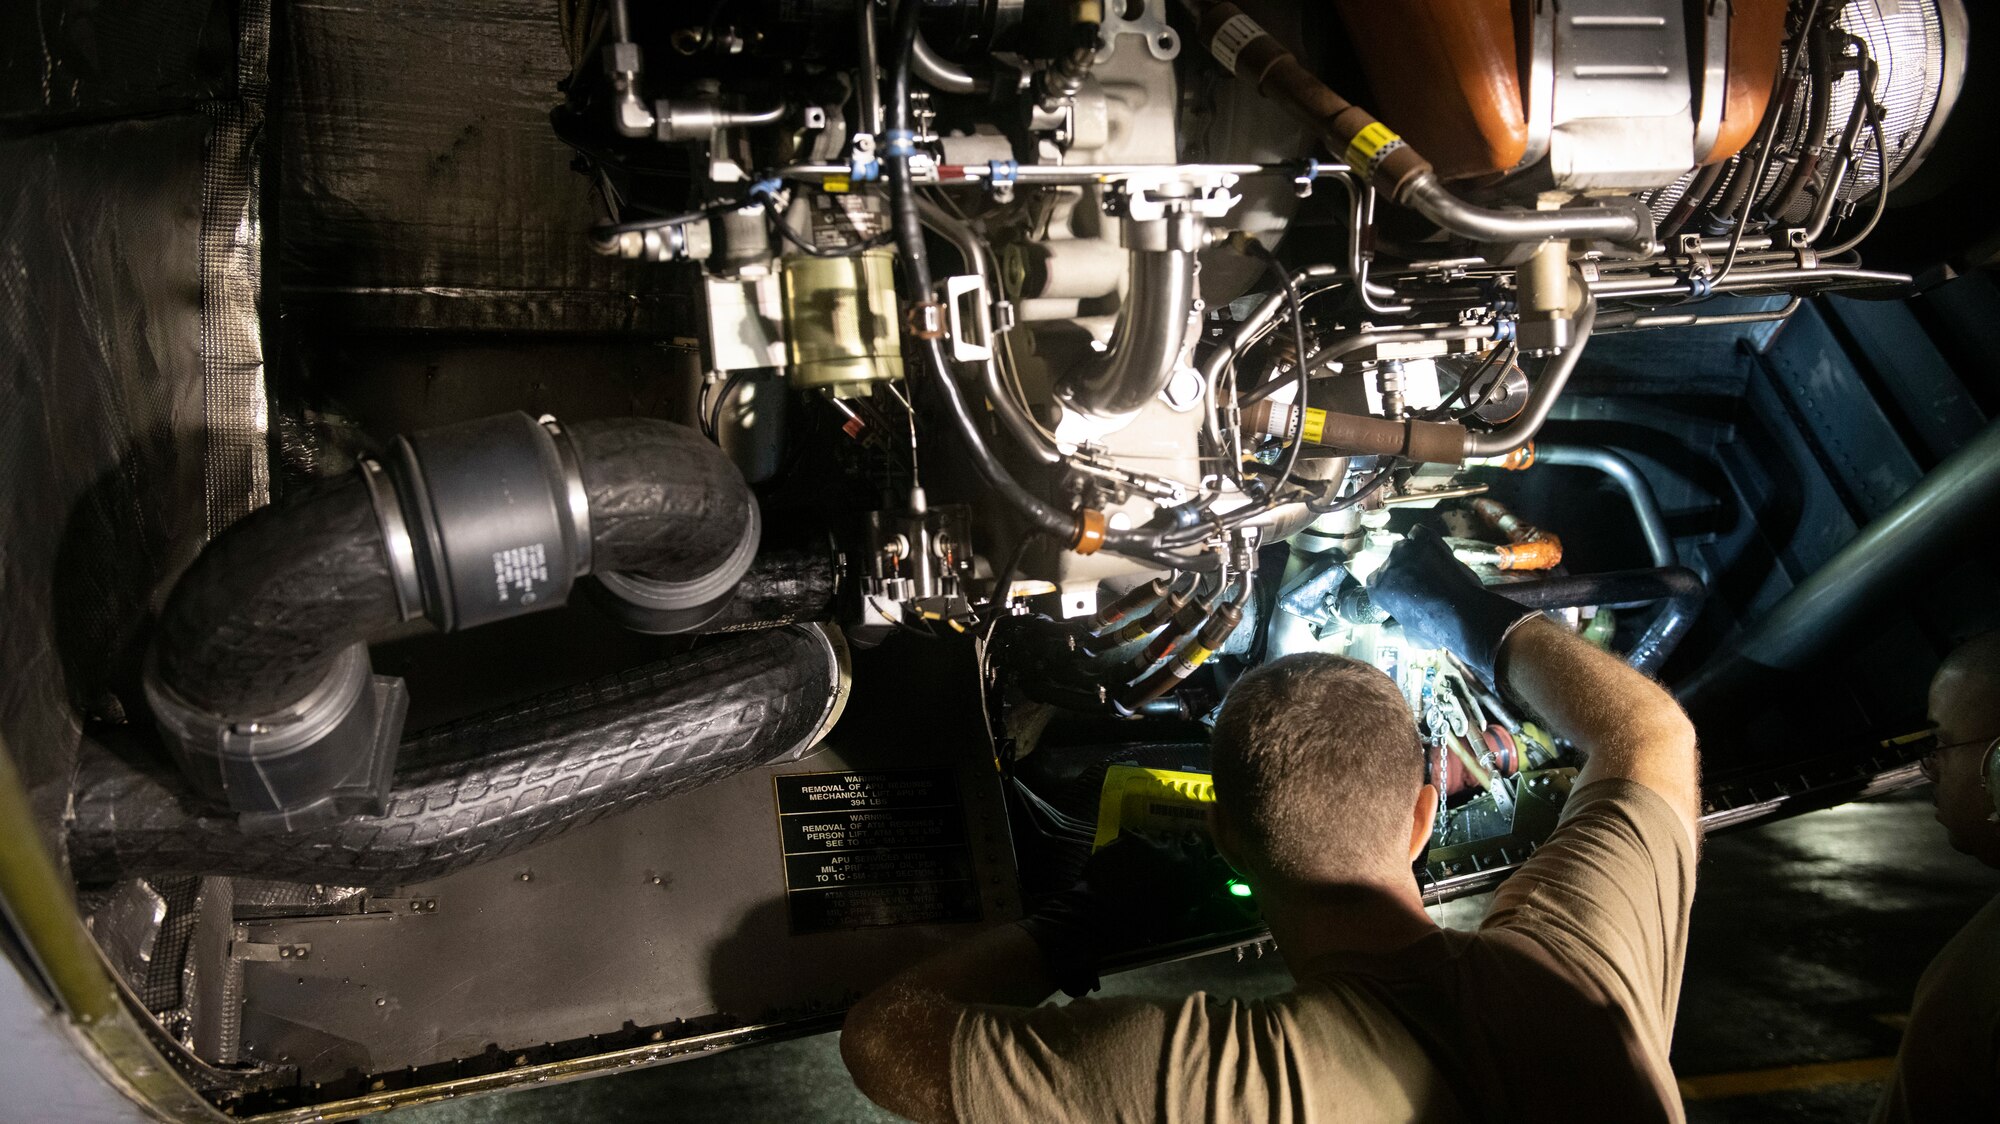 Staff Sgt. Brian Panas, 730th Air Mobility Squadron aircraft propulsion journeyman, checks a C-5M Super Galaxy air turbine motor prior to servicing at Yokota Air Base, Japan, Sept. 15, 2021. During this portion of a several day familiarization training, the 730th AMS replaced hydraulic fluid, provided a liquid nitrogen resupply and learned how to utilize a control panel for fuels. (U.S. Air Force photo by Staff Sgt. Joshua Edwards)